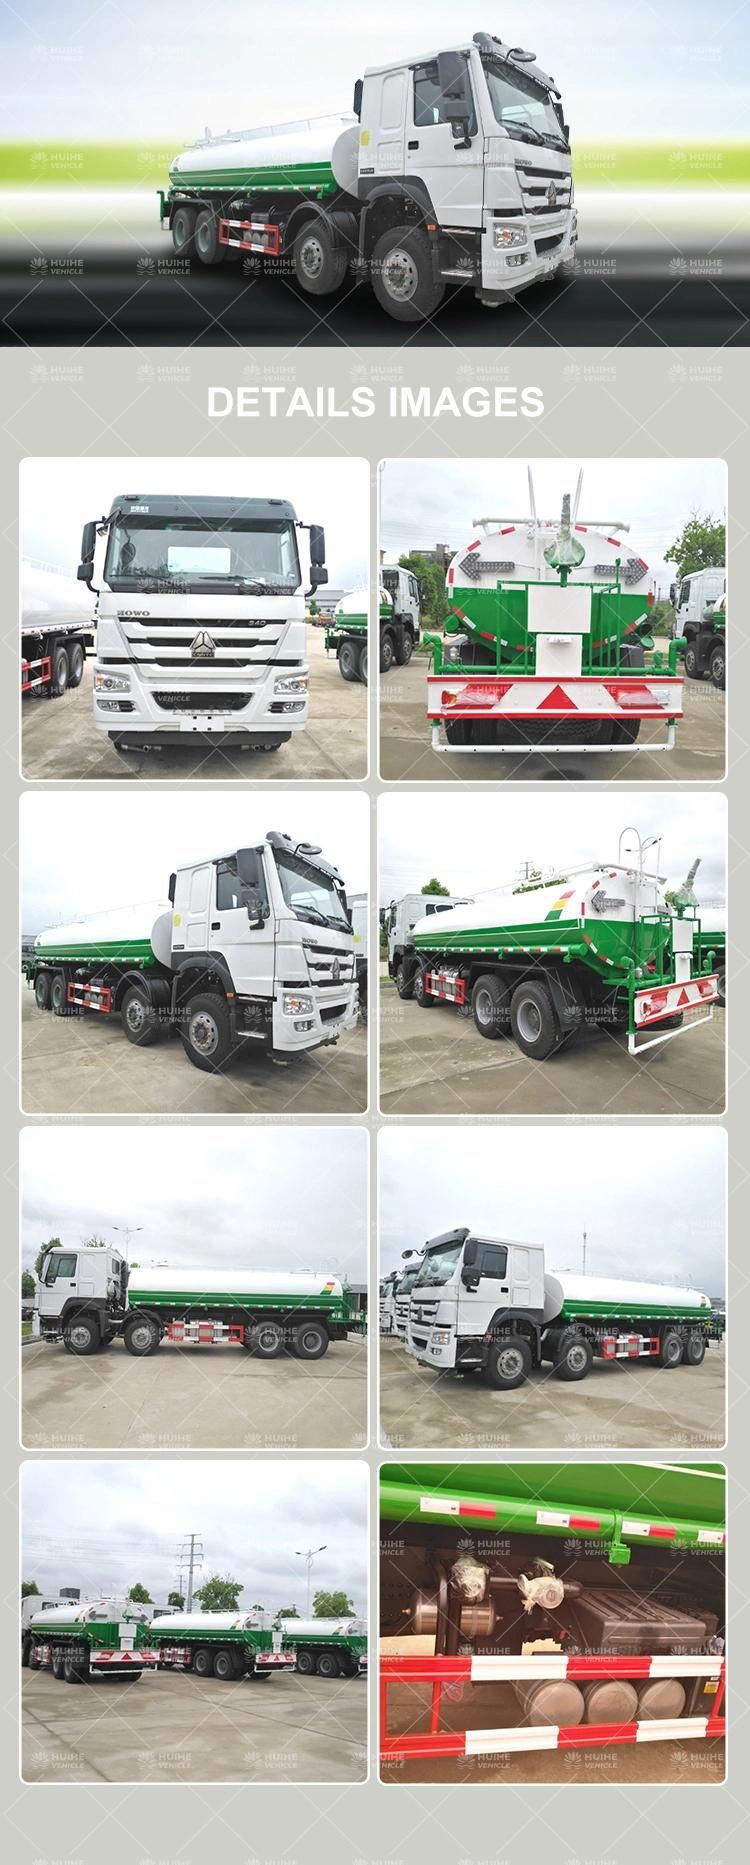 Used Water Tanker Truck HOWO 20000 Liter Used Water Trucks Price with Good Conditions From China for Sales